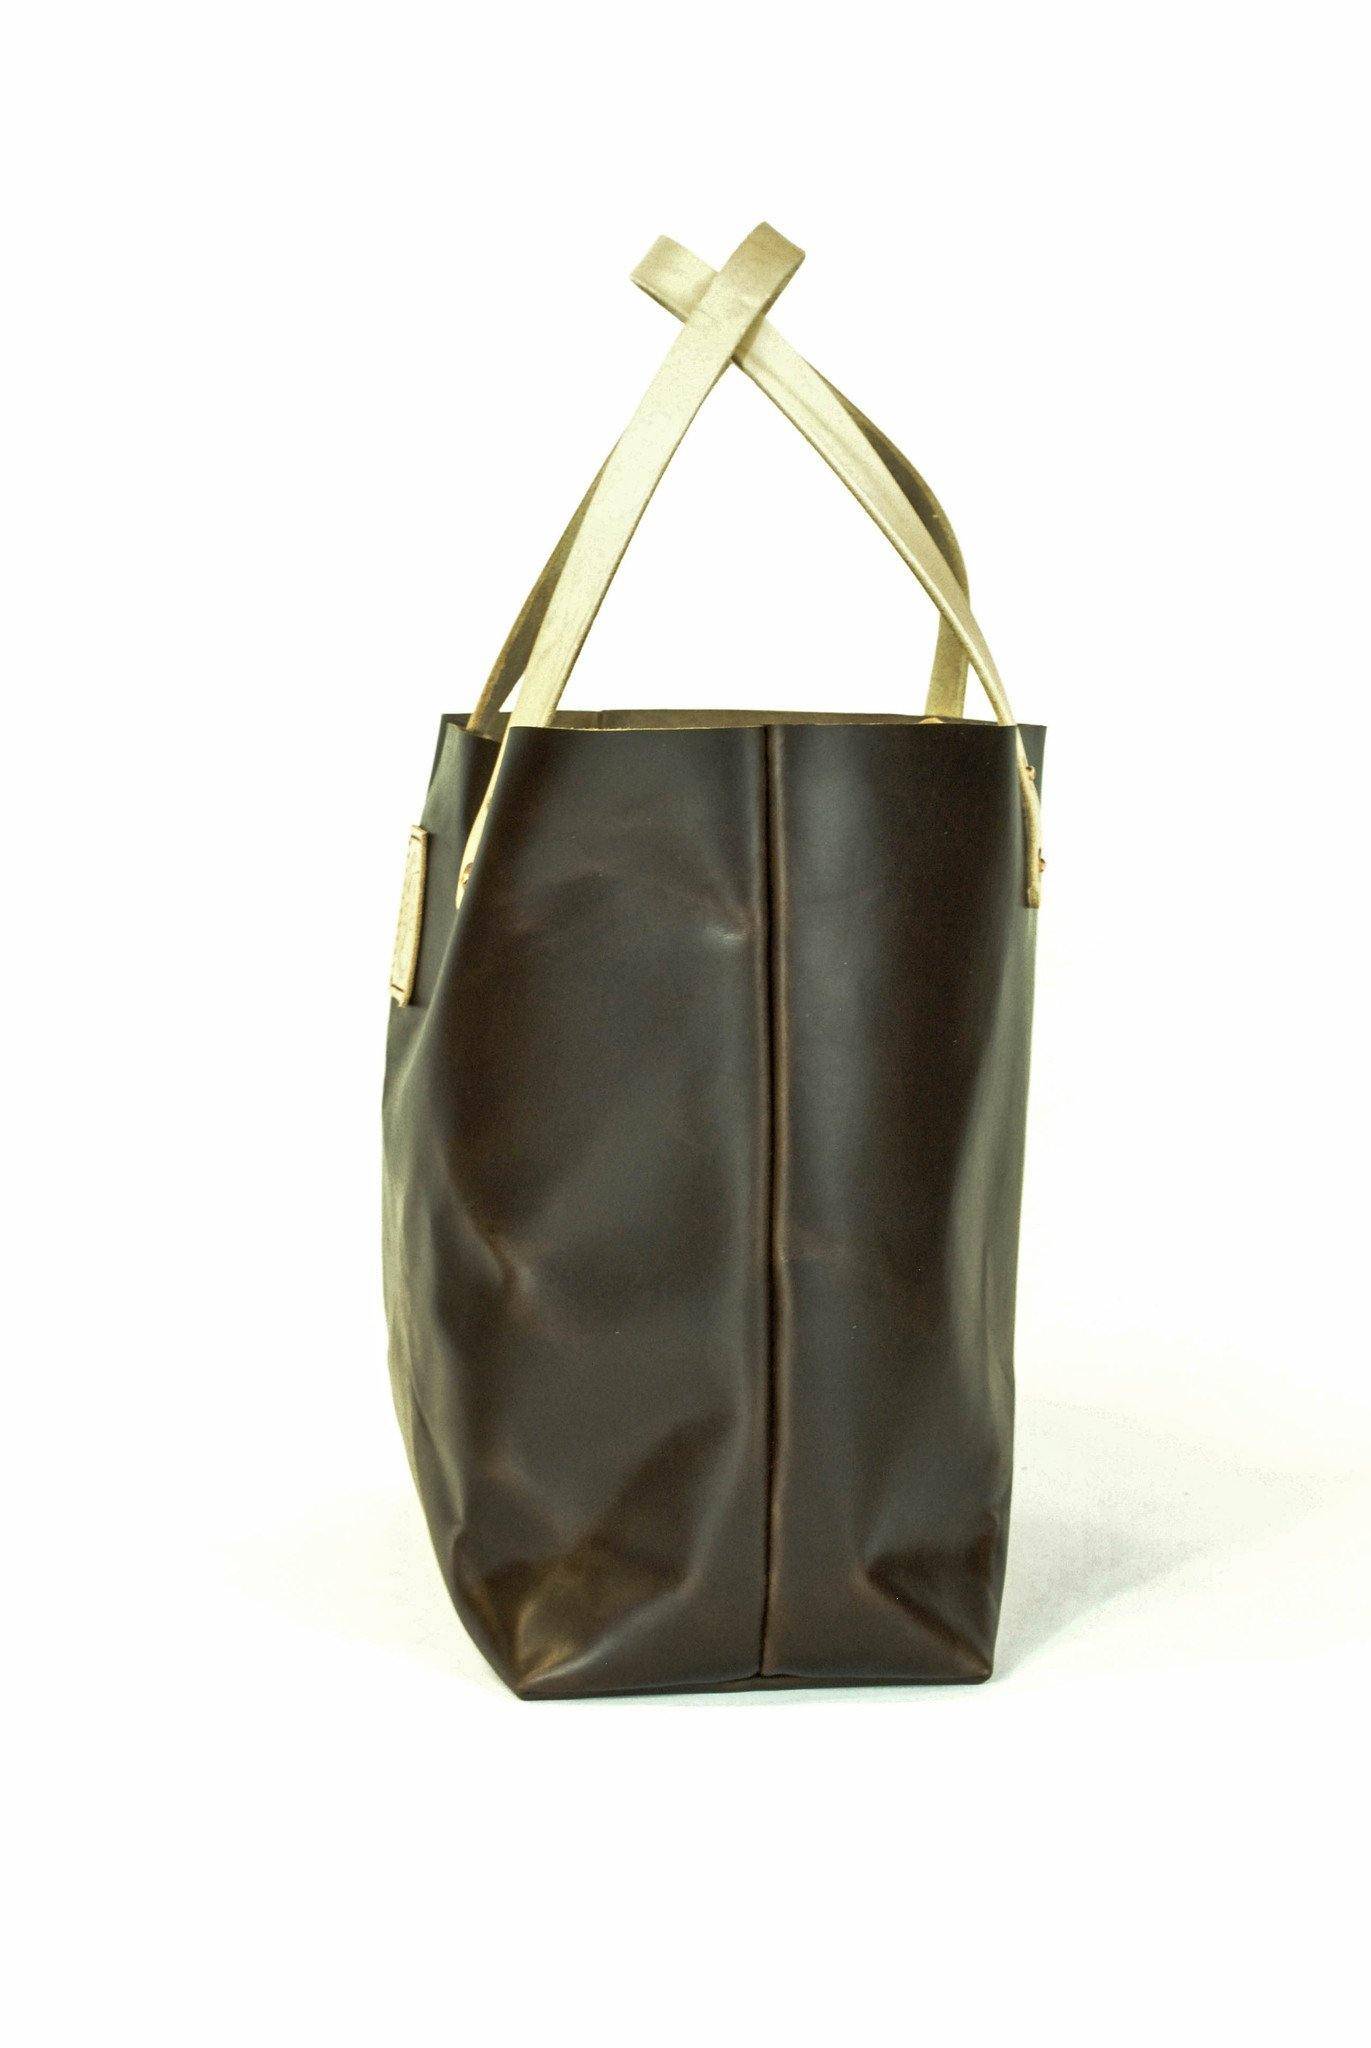 The Paxton Tote